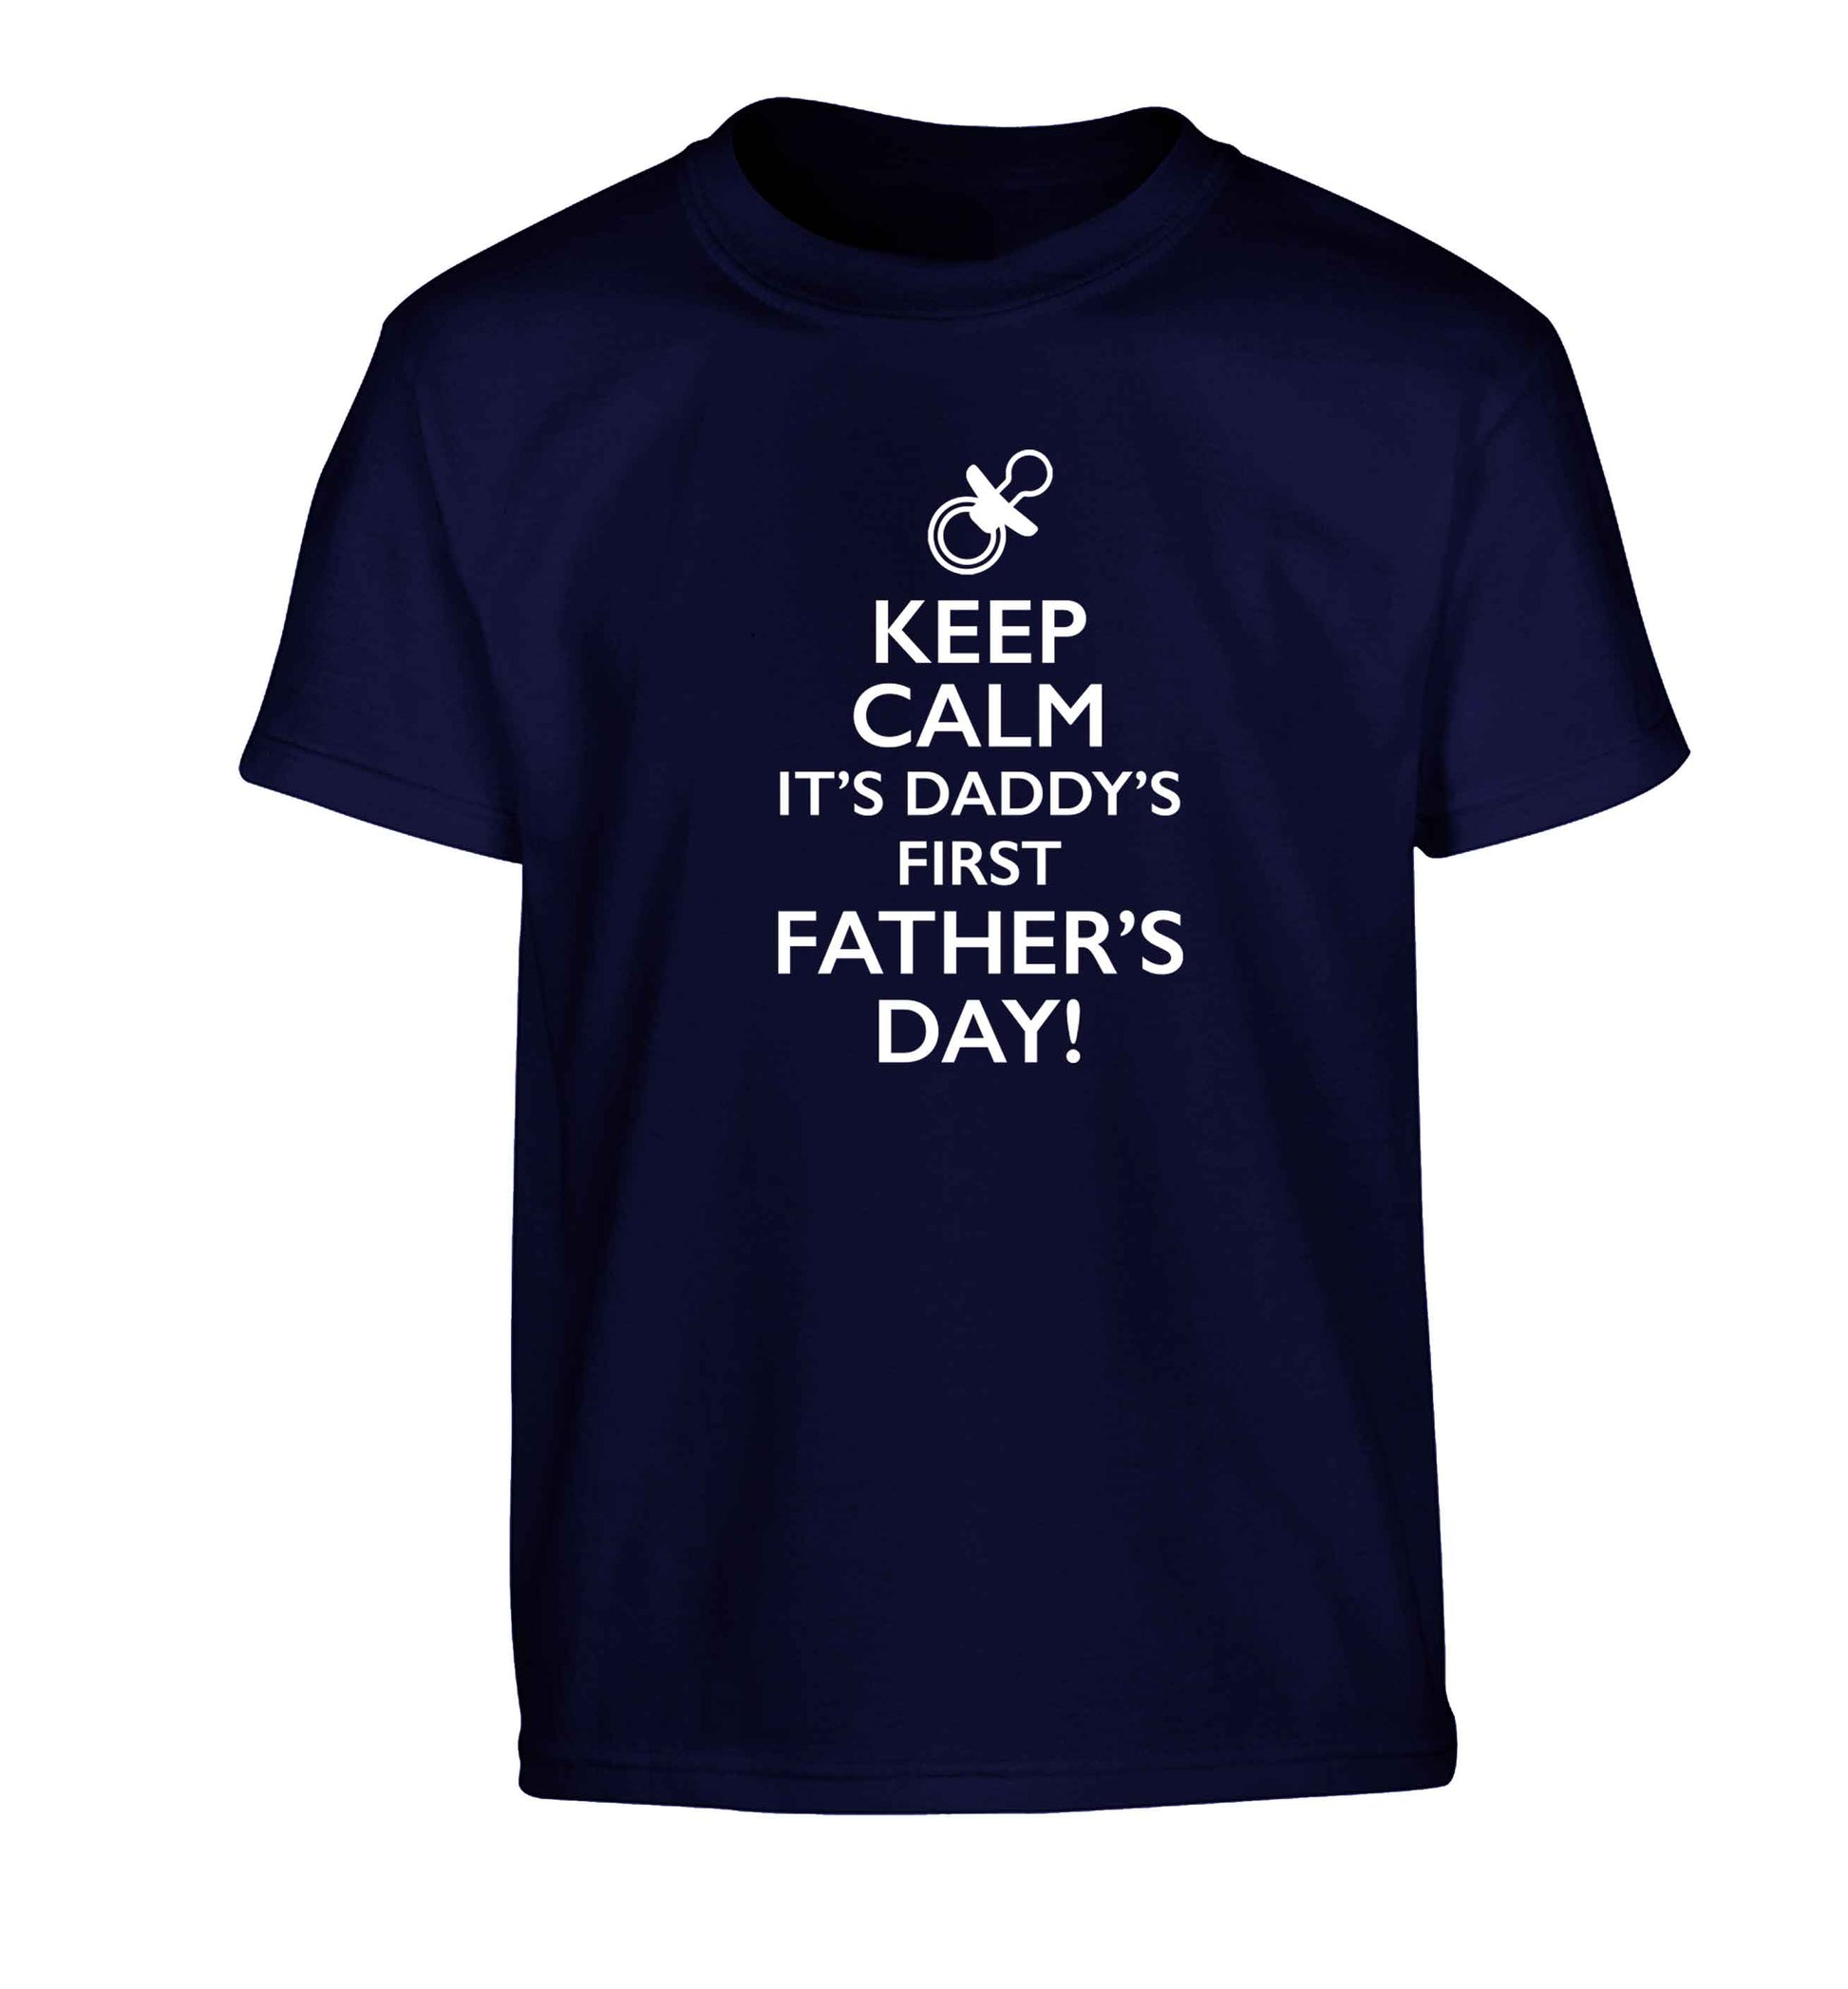 Keep calm it's daddys first father's day Children's navy Tshirt 12-13 Years